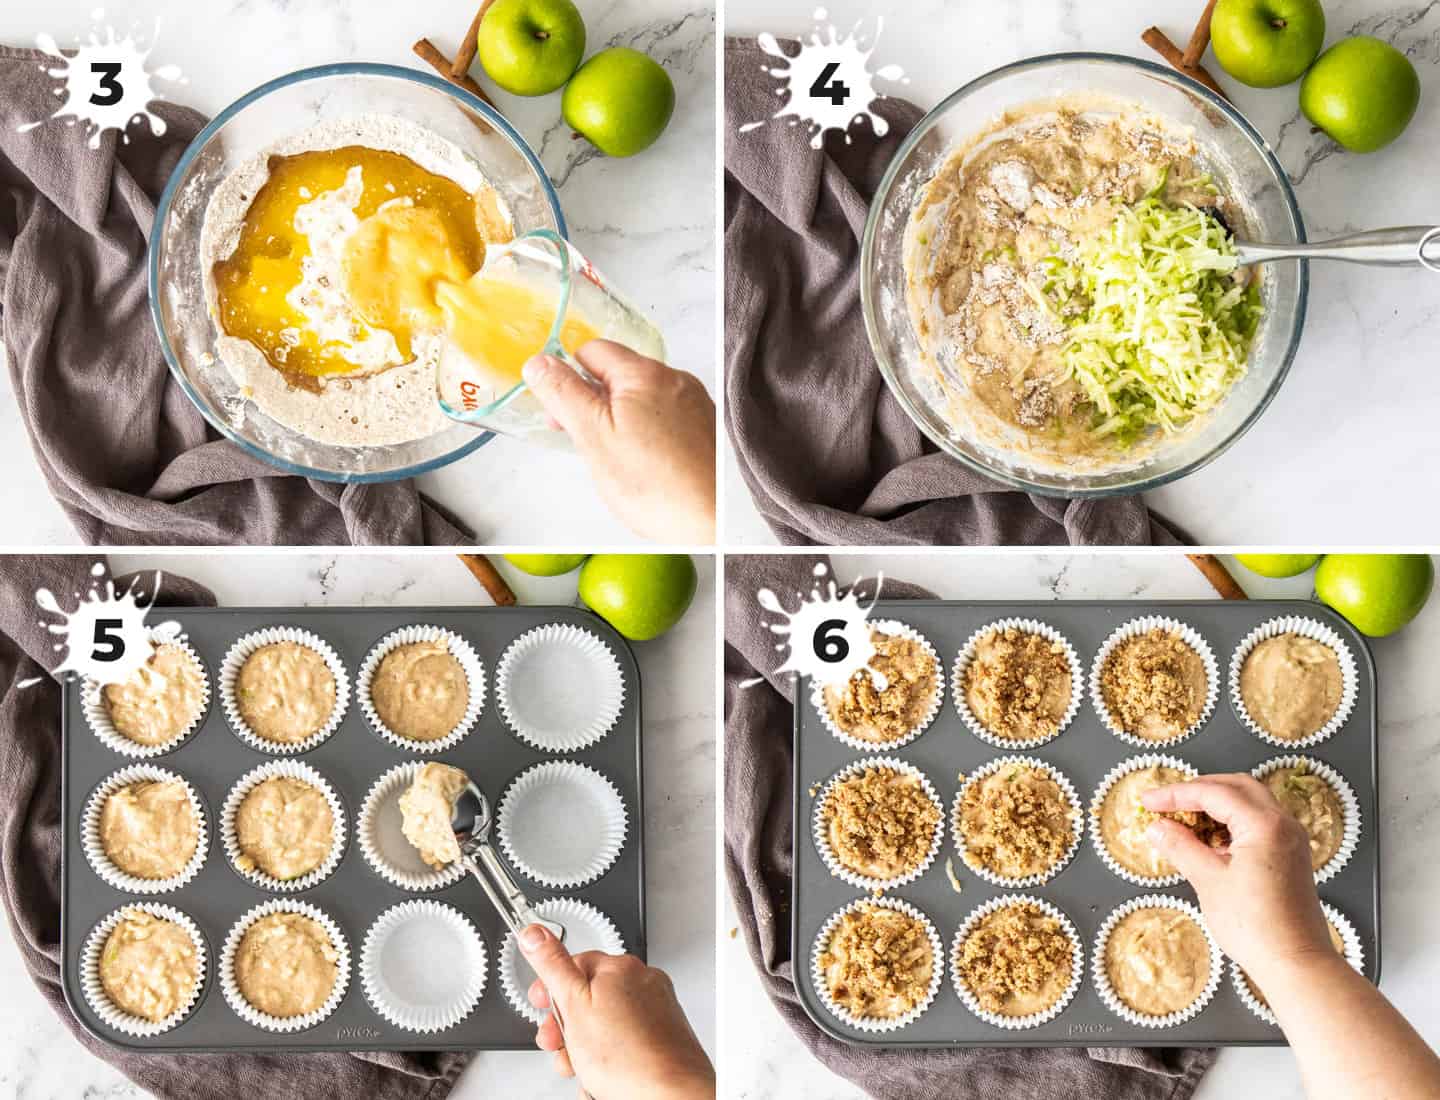 A collage of 4 images showing how to make the muffin batter.